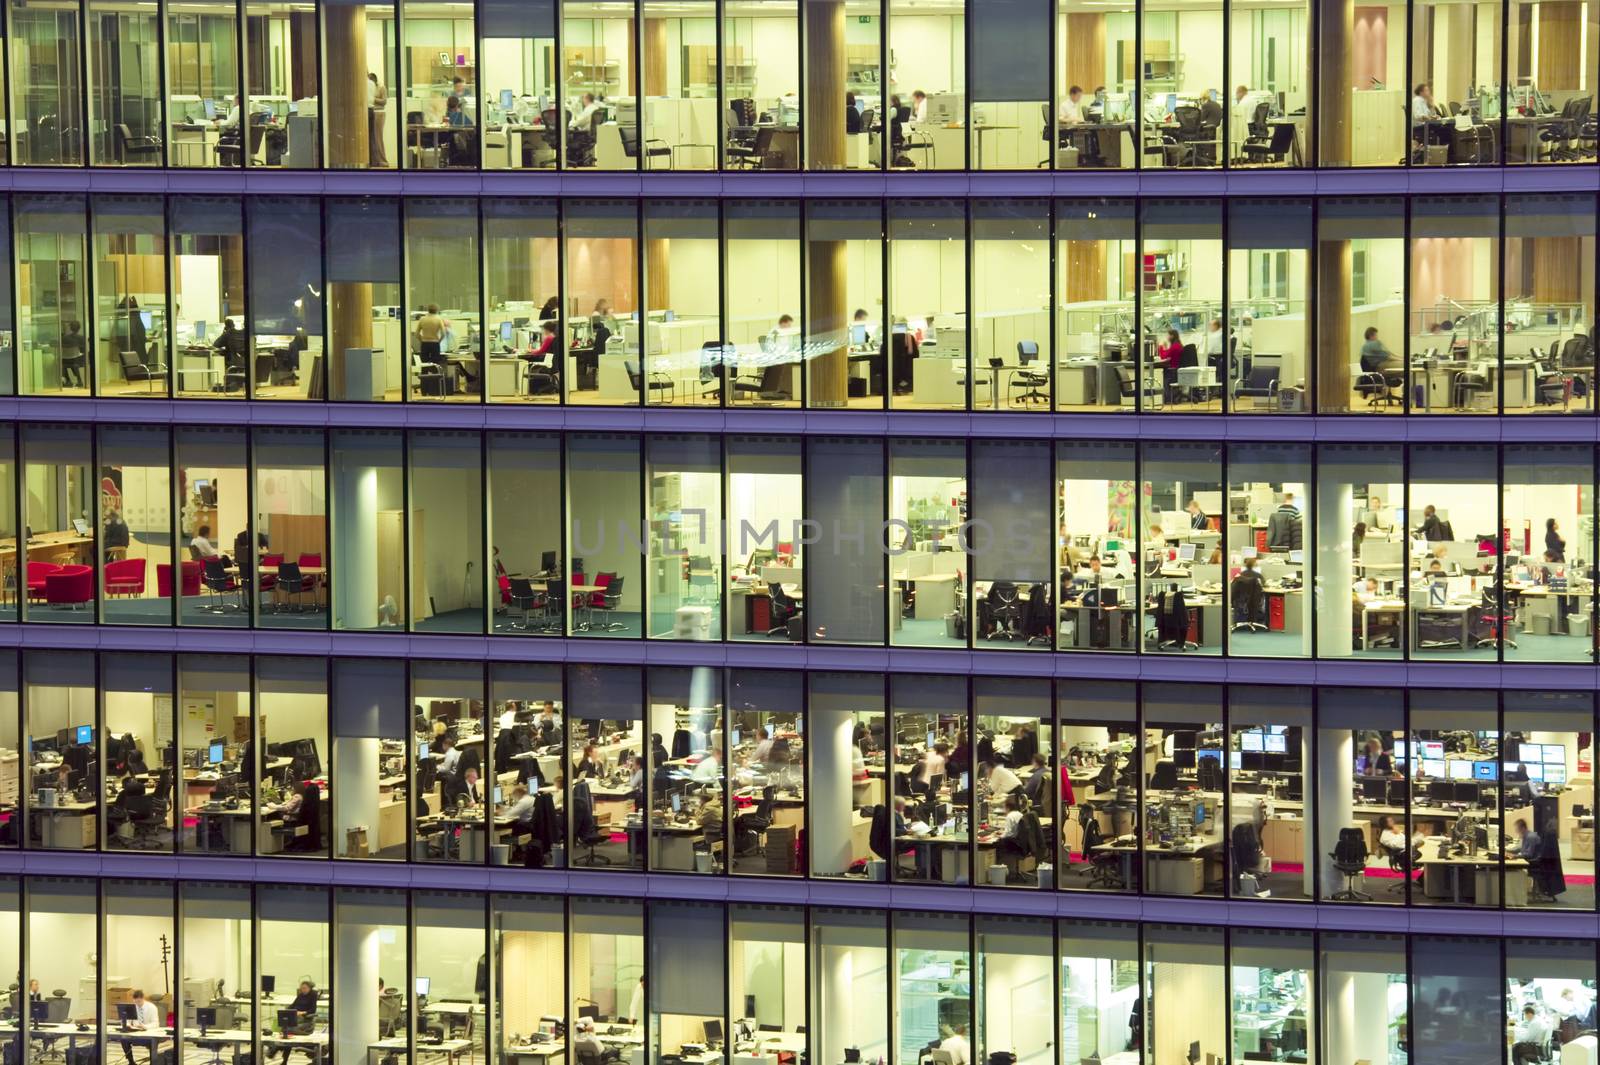 Modern office at night, showing the daily activity of office workers.